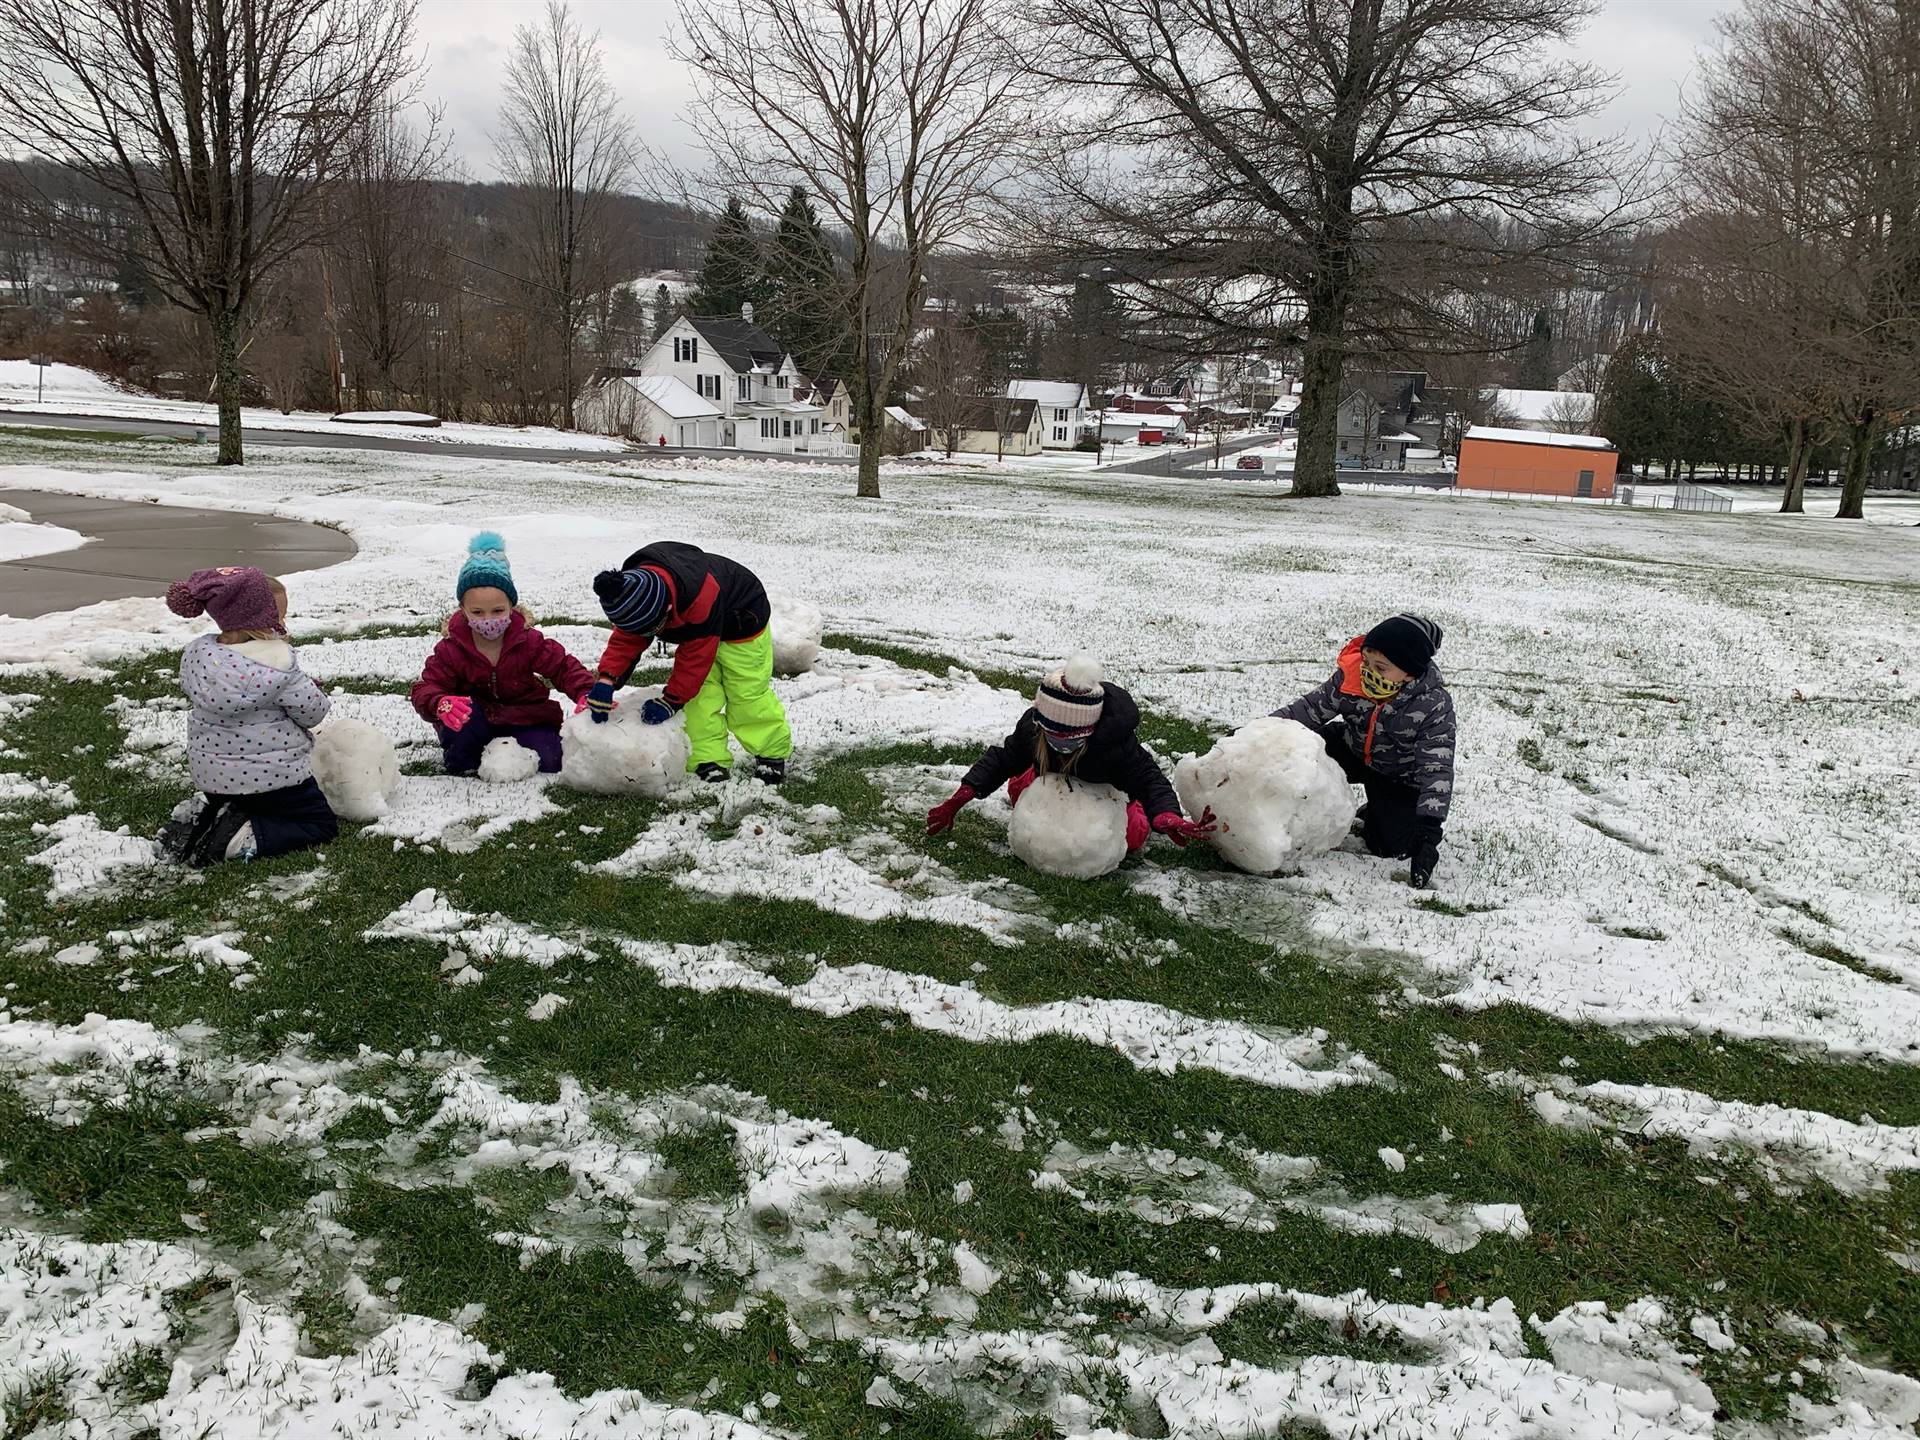 5 students rolling snowballs outside.